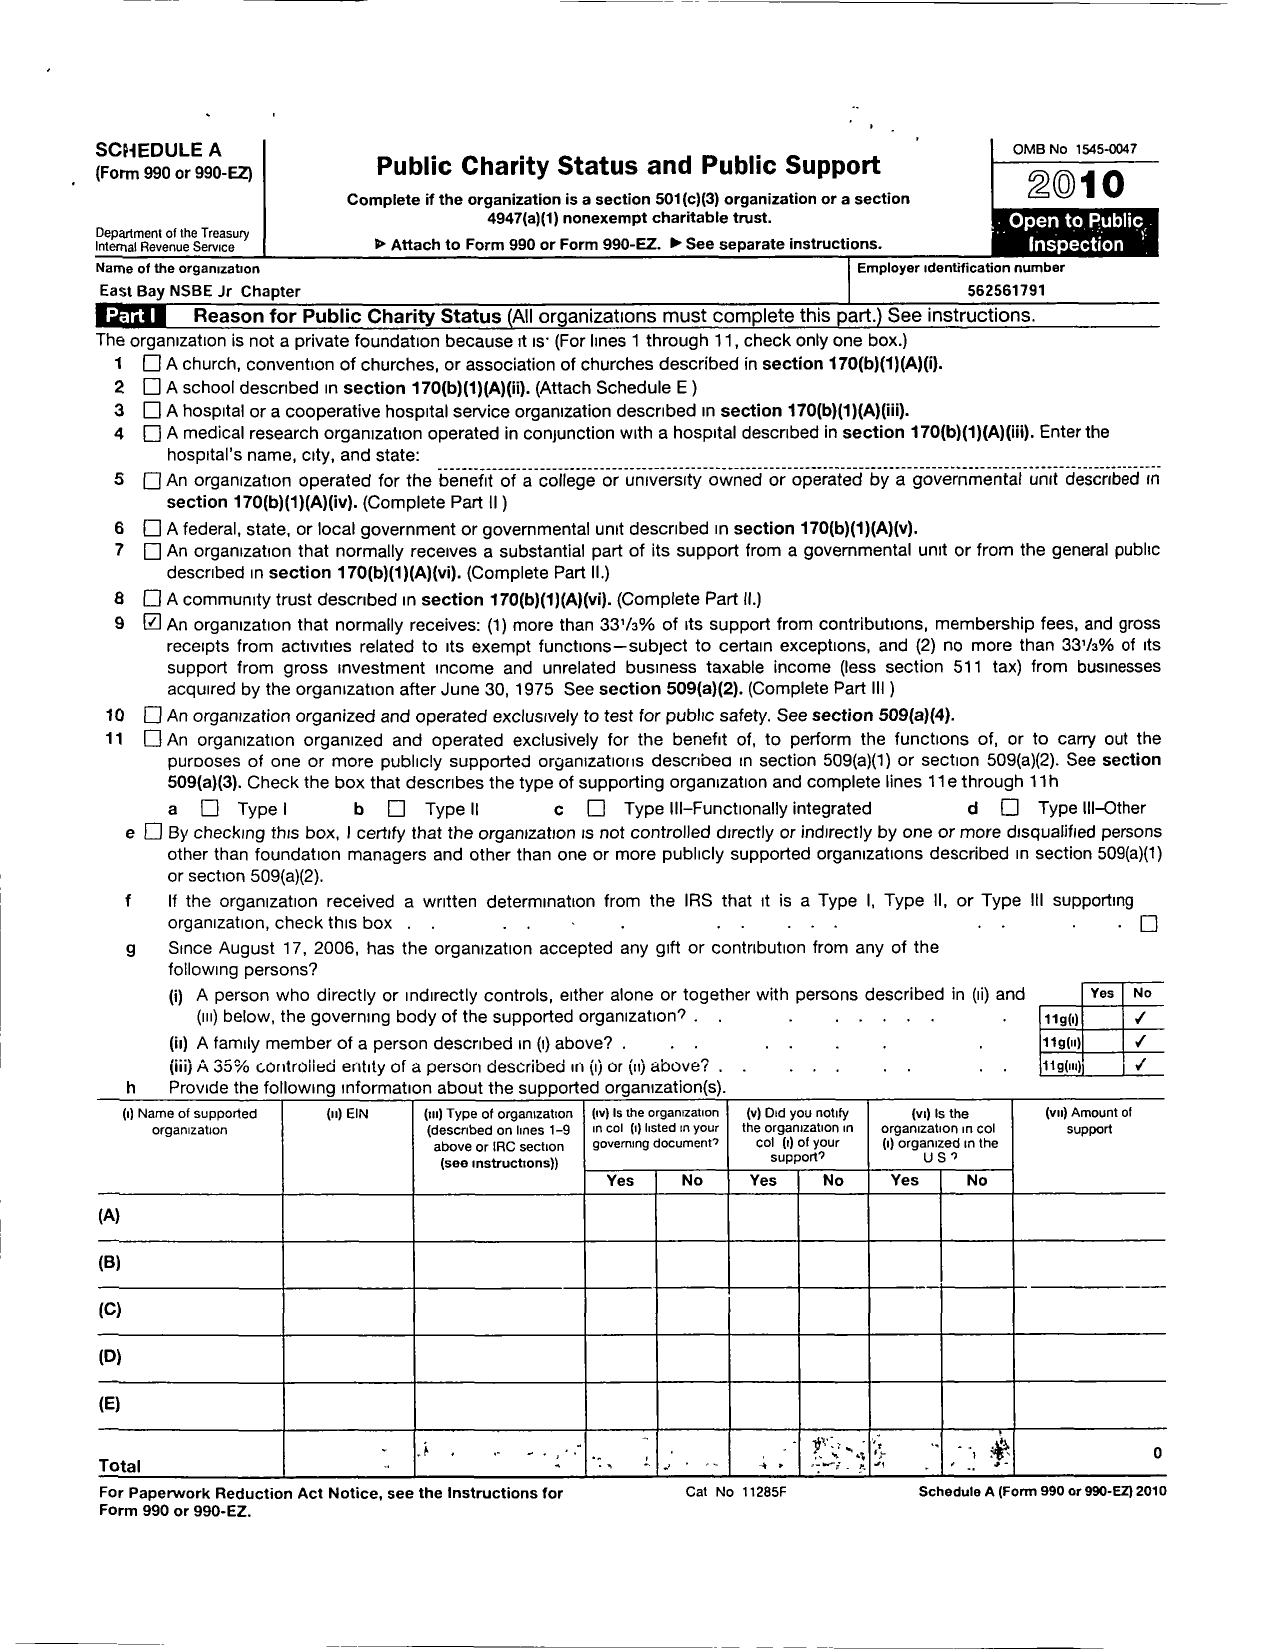 Image of first page of 2010 Form 990ER for East Bay Nsbe JR Chapter